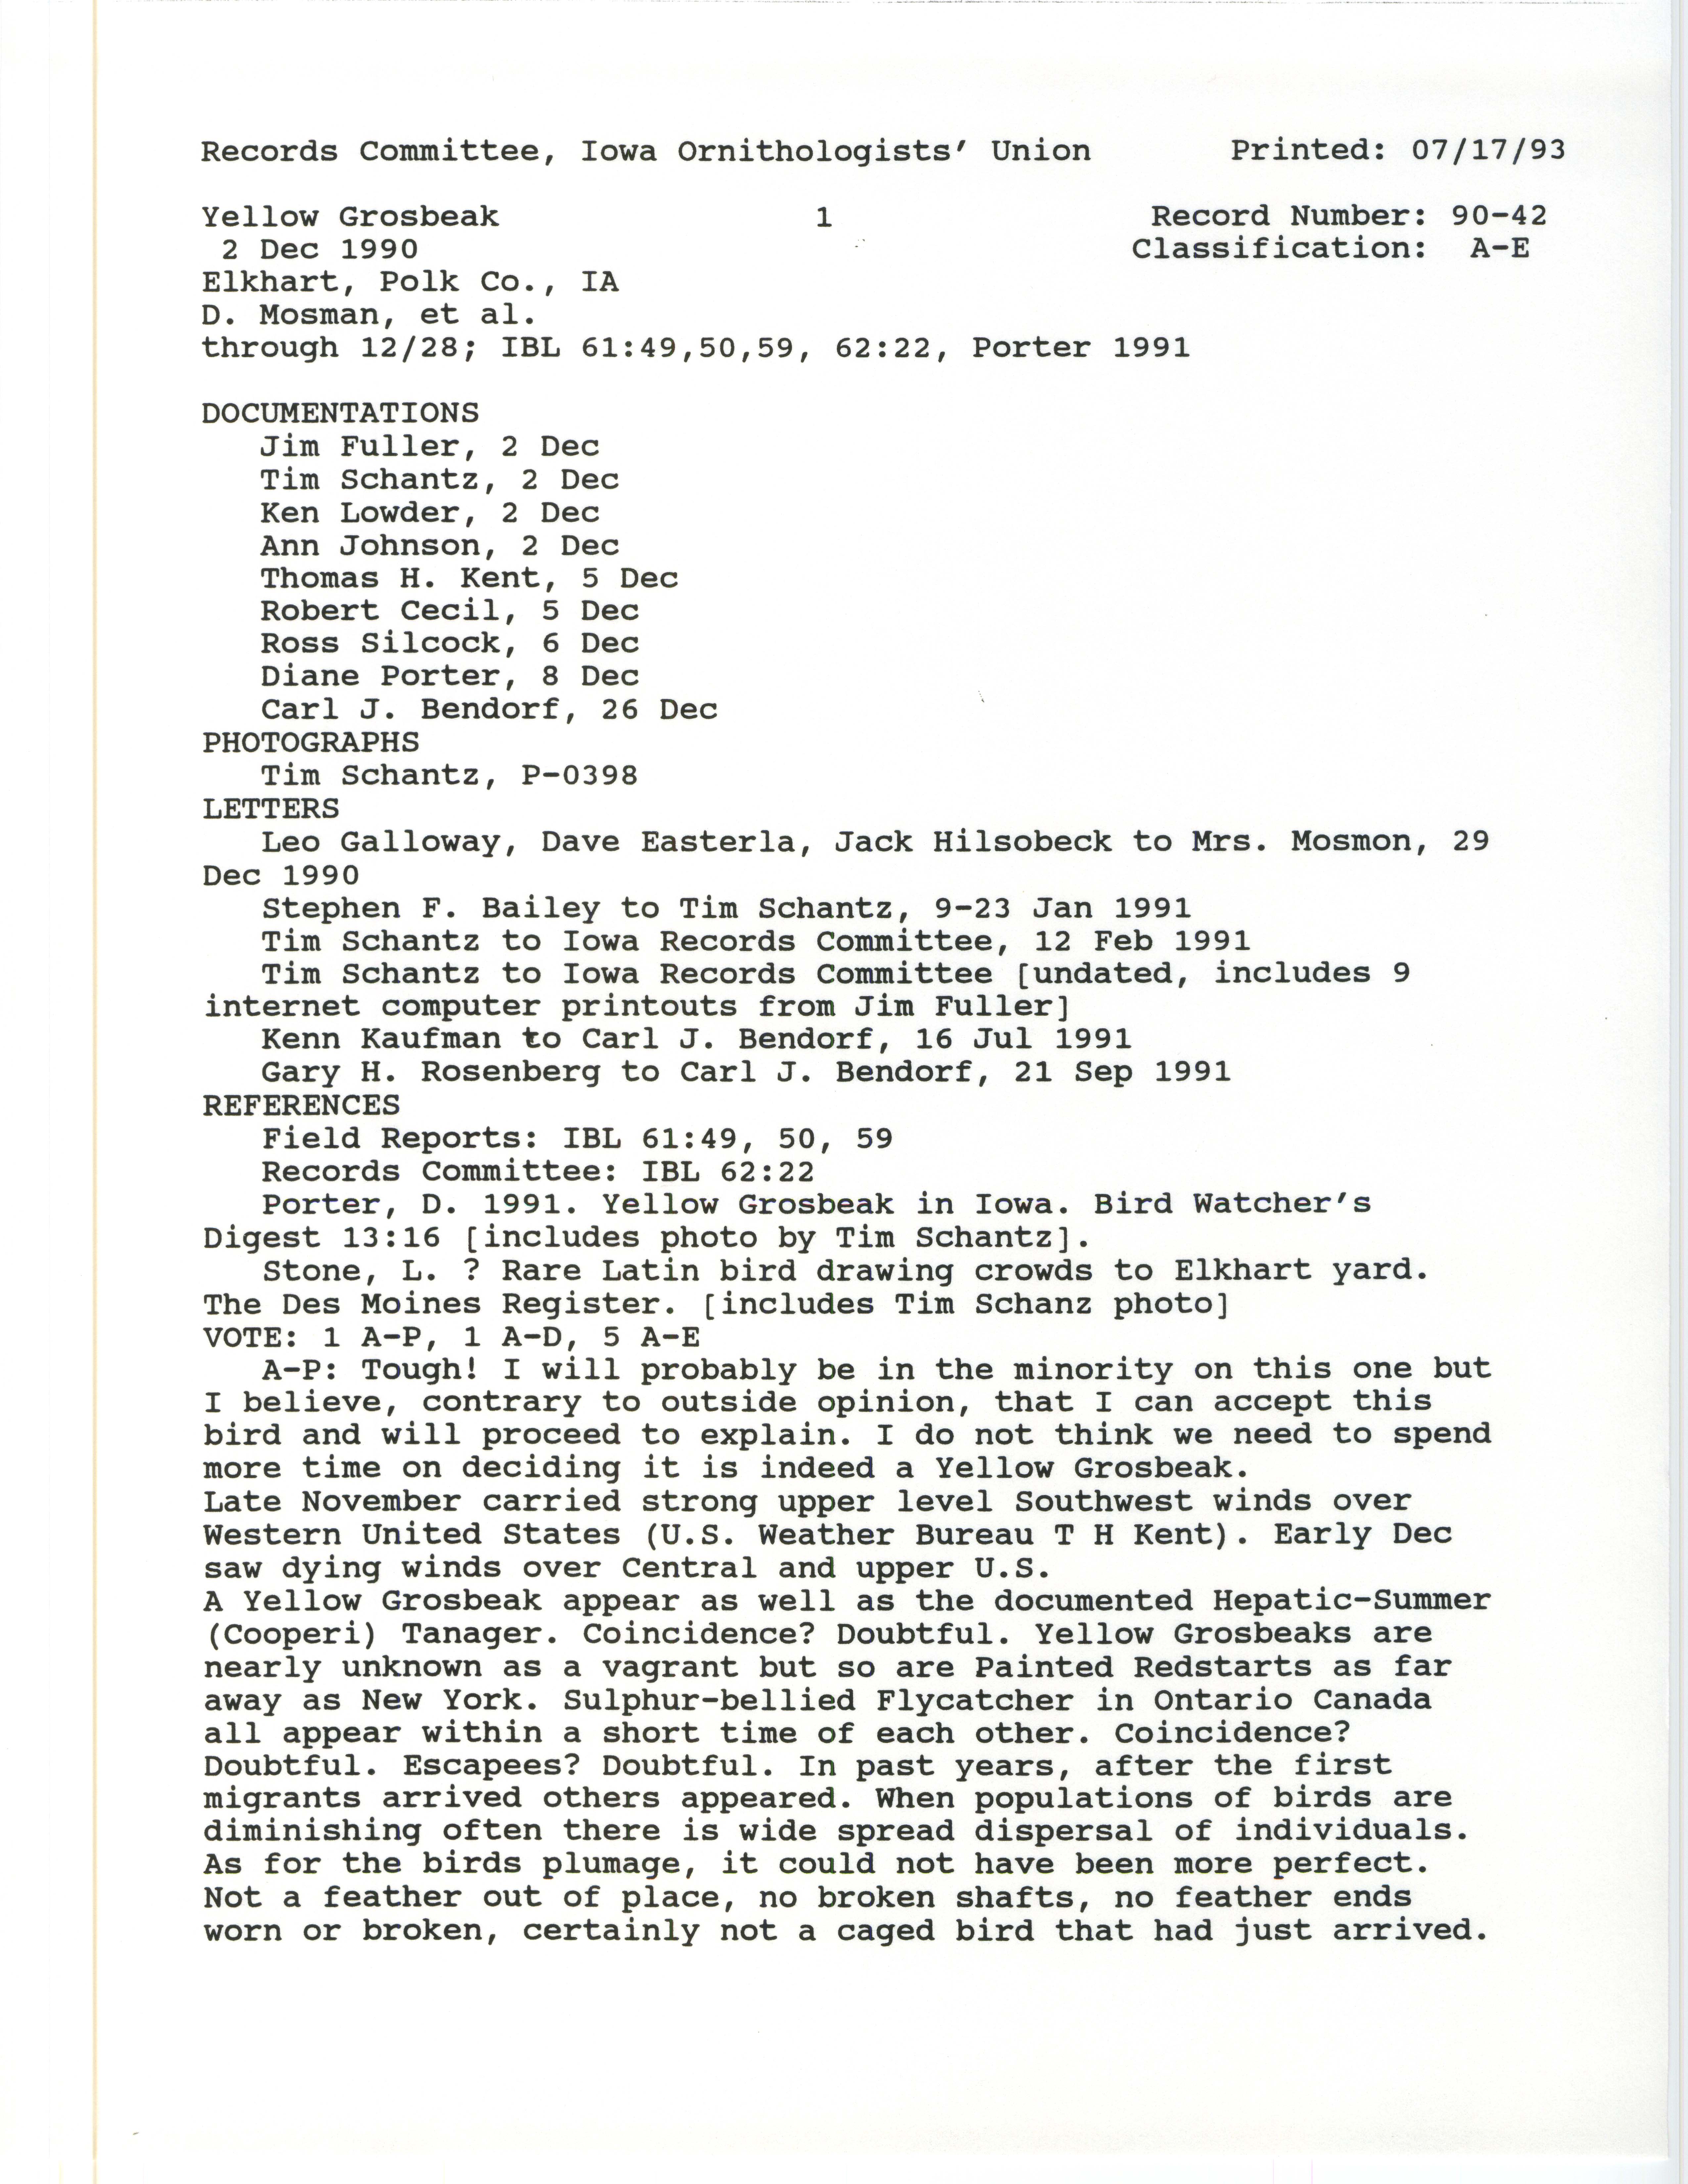 Records Committee review for rare bird sighting for Yellow Grosbeak near Elkhart, 1990